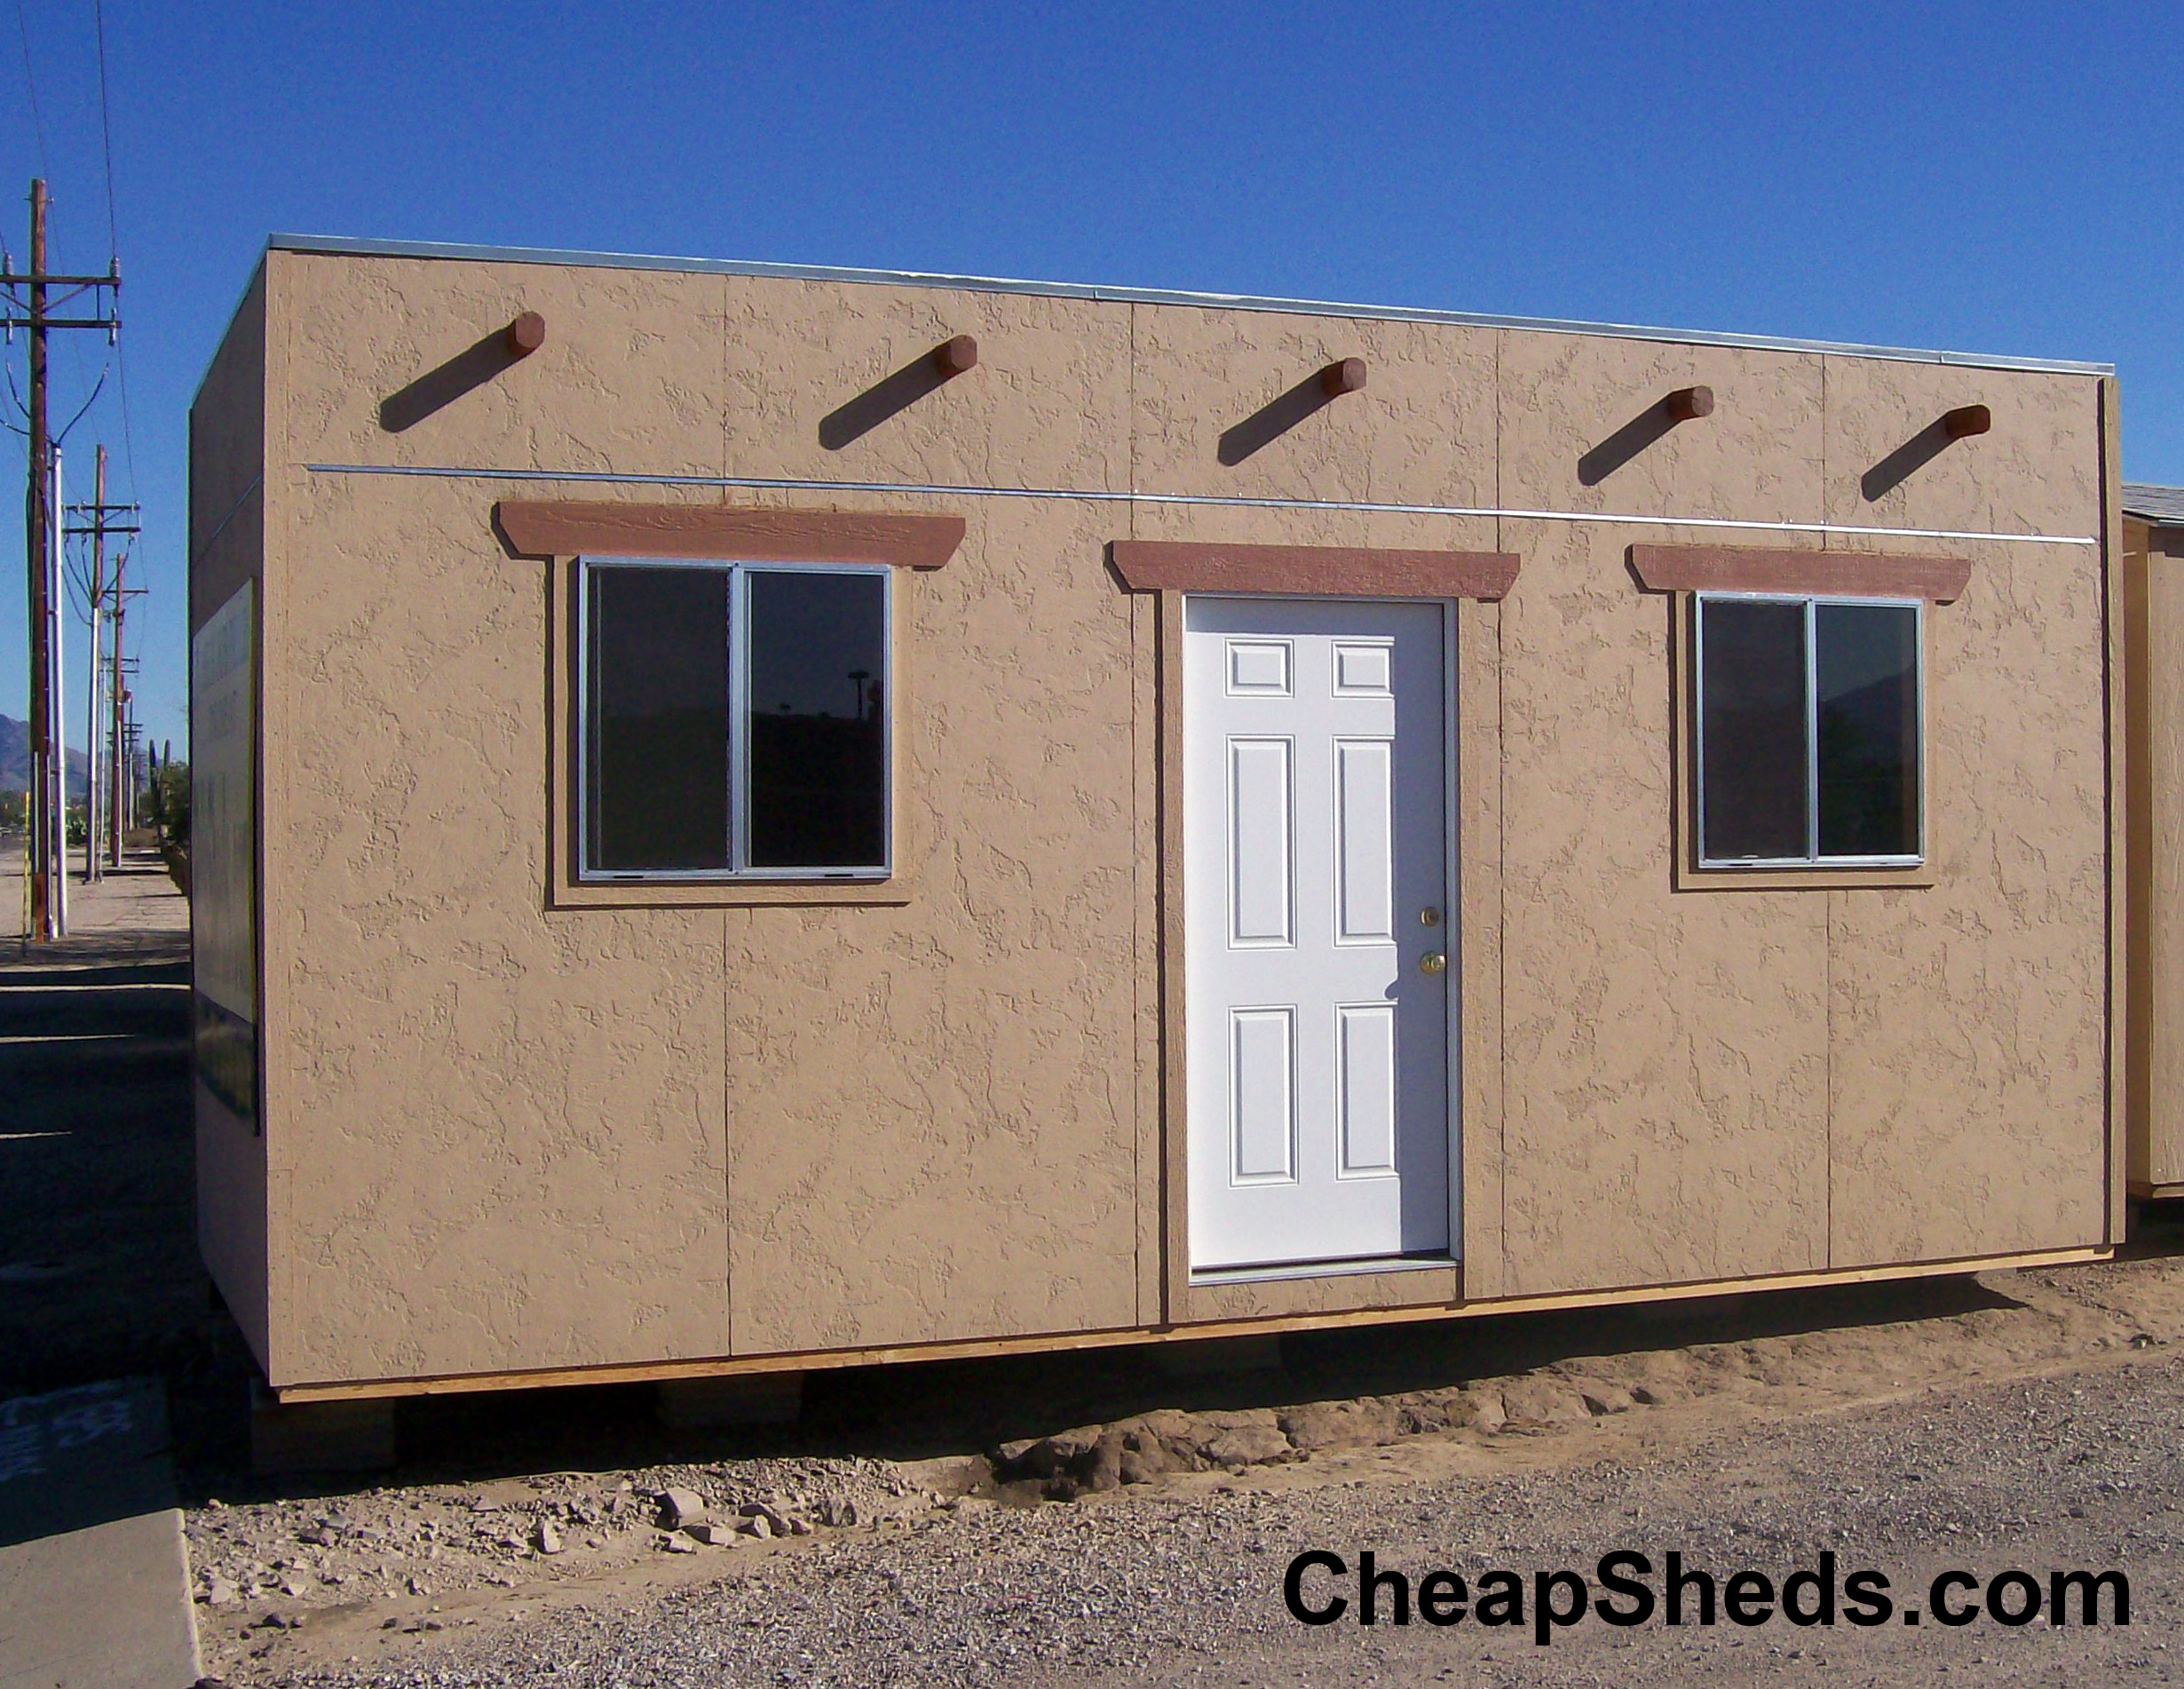 click here to see my shed plans how to build a shed start here free 